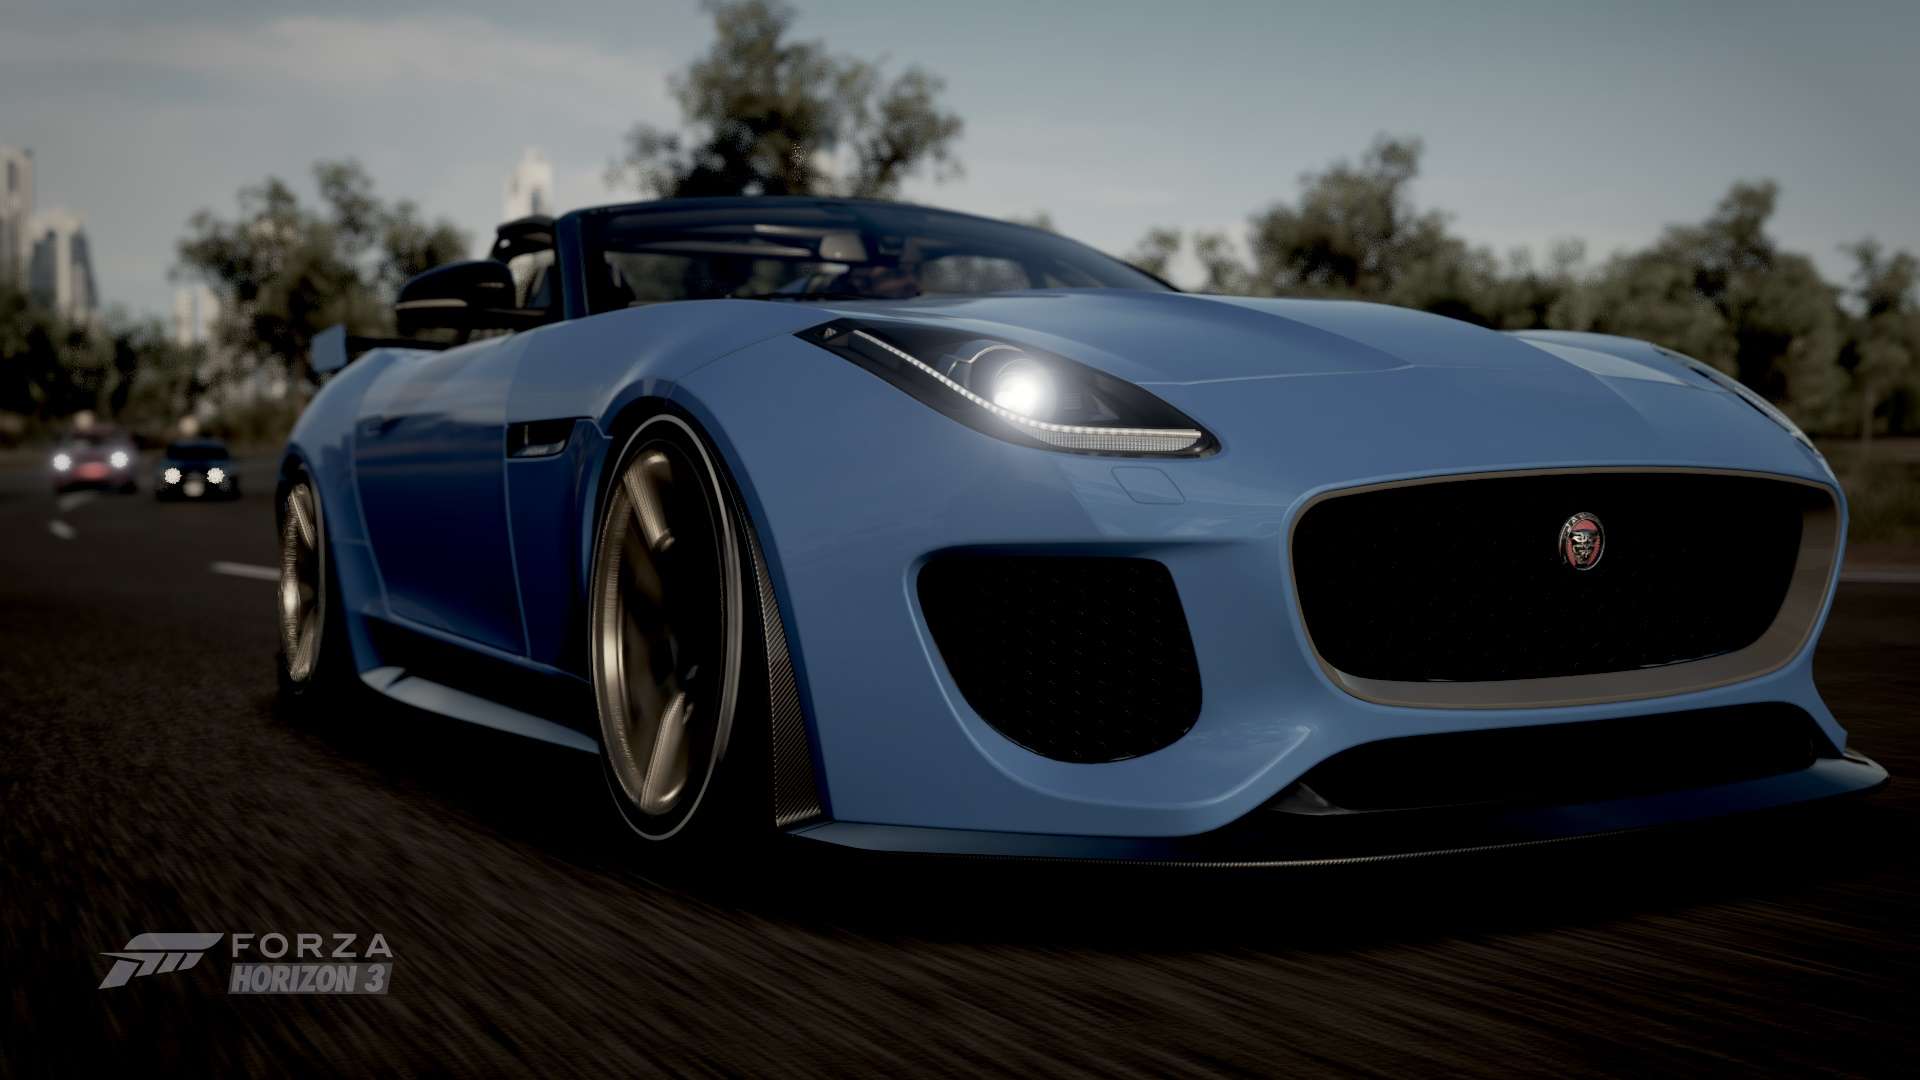 F-type project 7